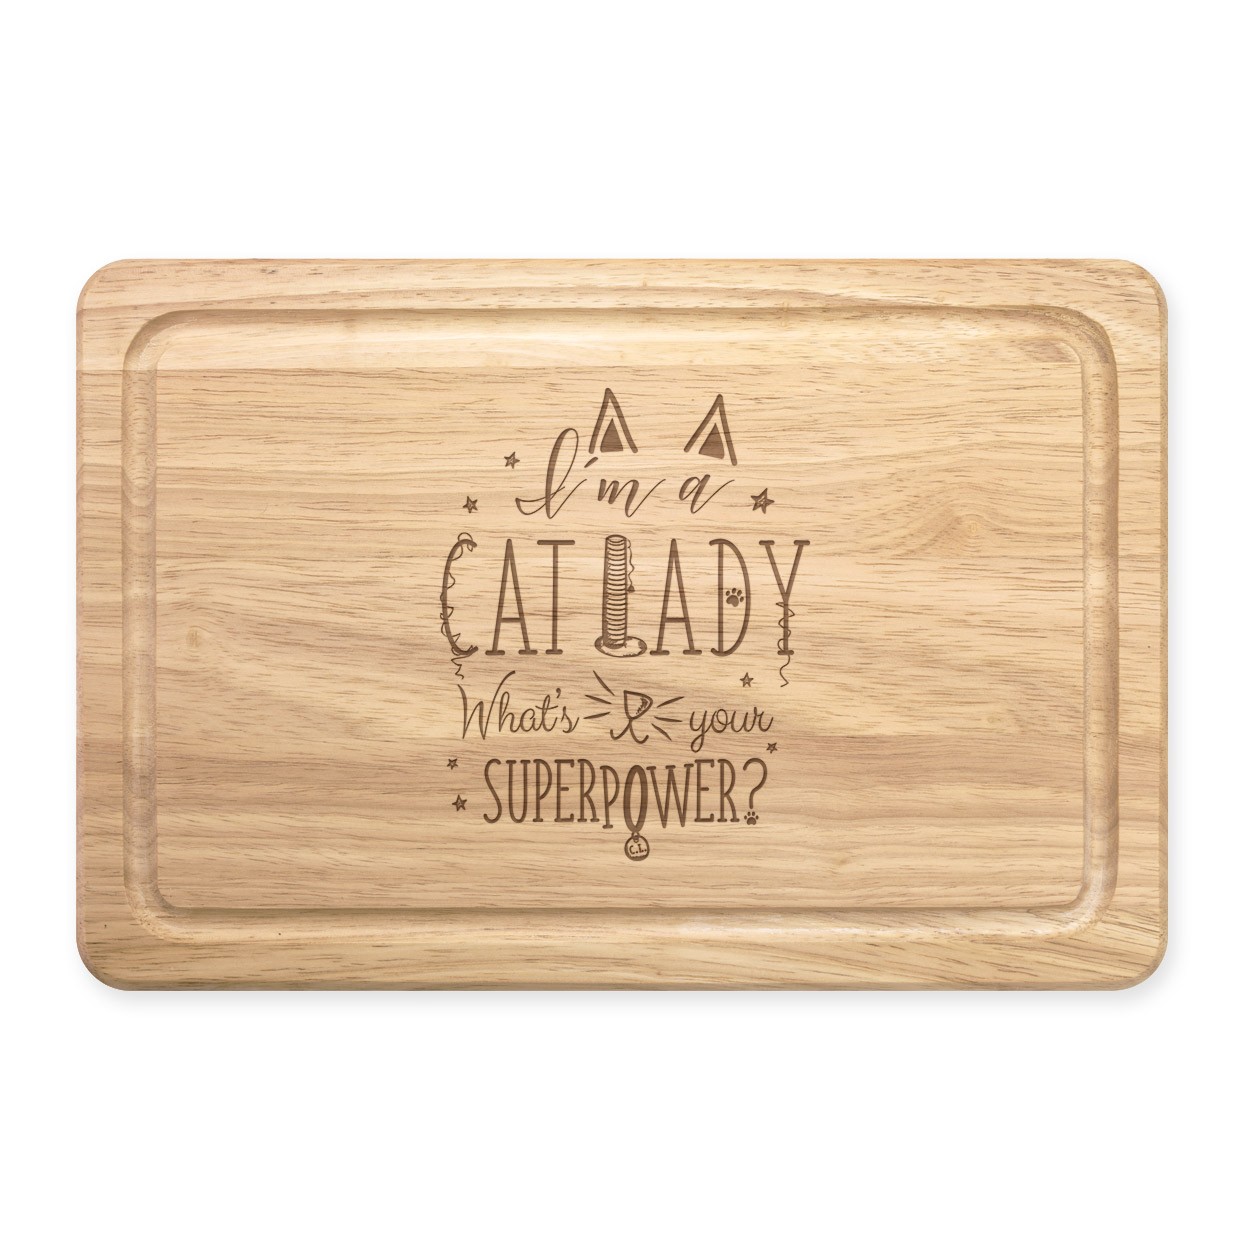 I'm A Cat Lady What's Your Superpower Rectangular Wooden Chopping Board